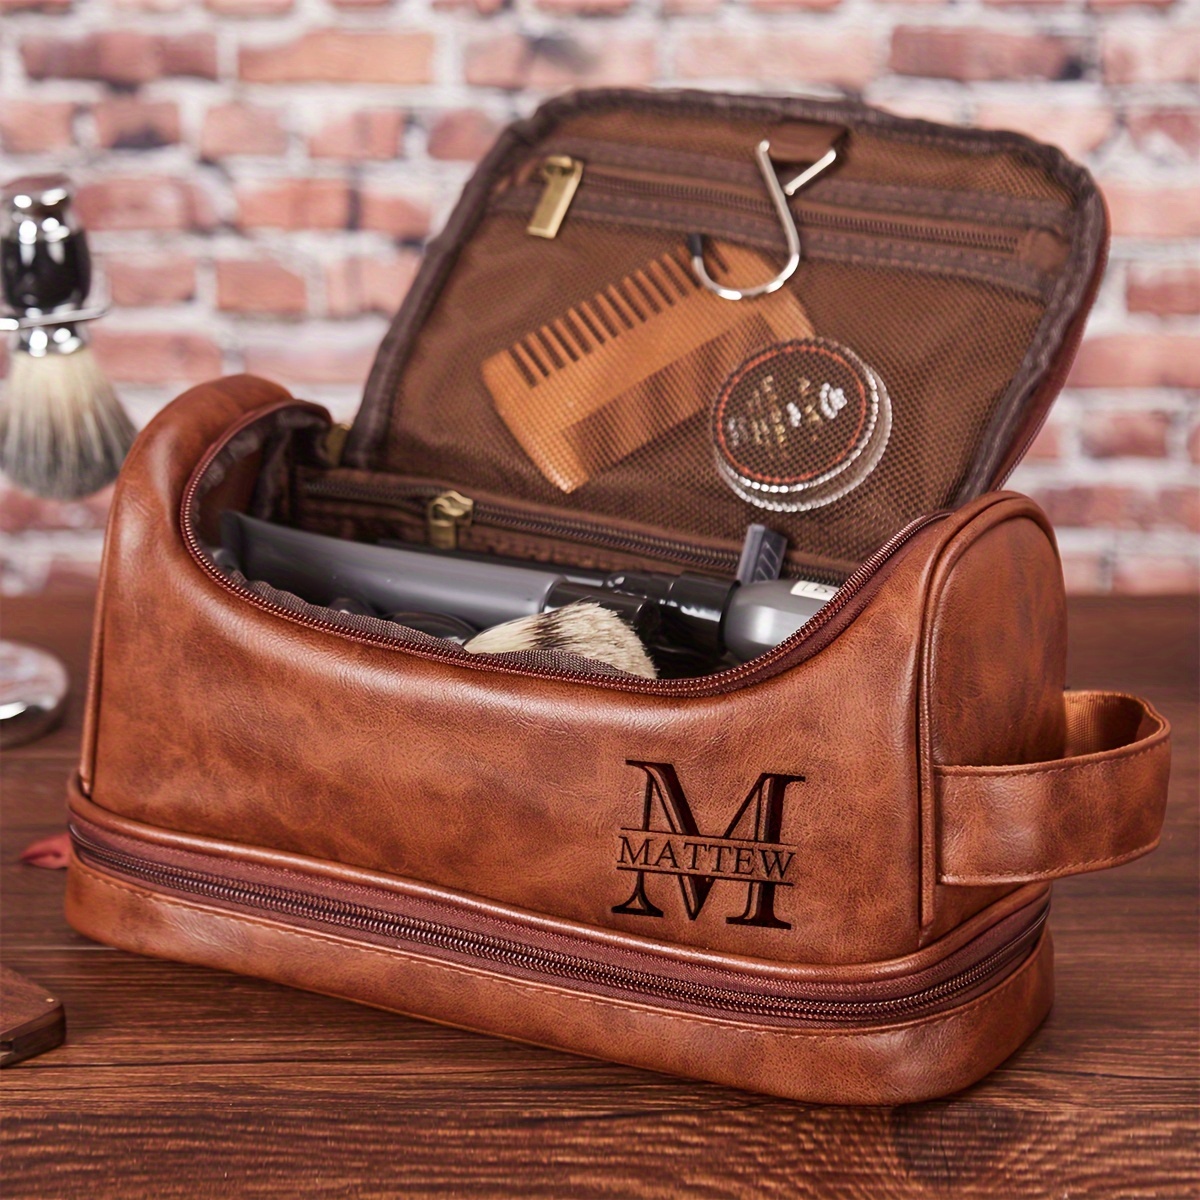 

Custom Men's Leather Toiletry Bag - Waterproof Travel Dopp Kit, Perfect Gift For Husband, Dad, Boyfriend On Birthday, Father's Day